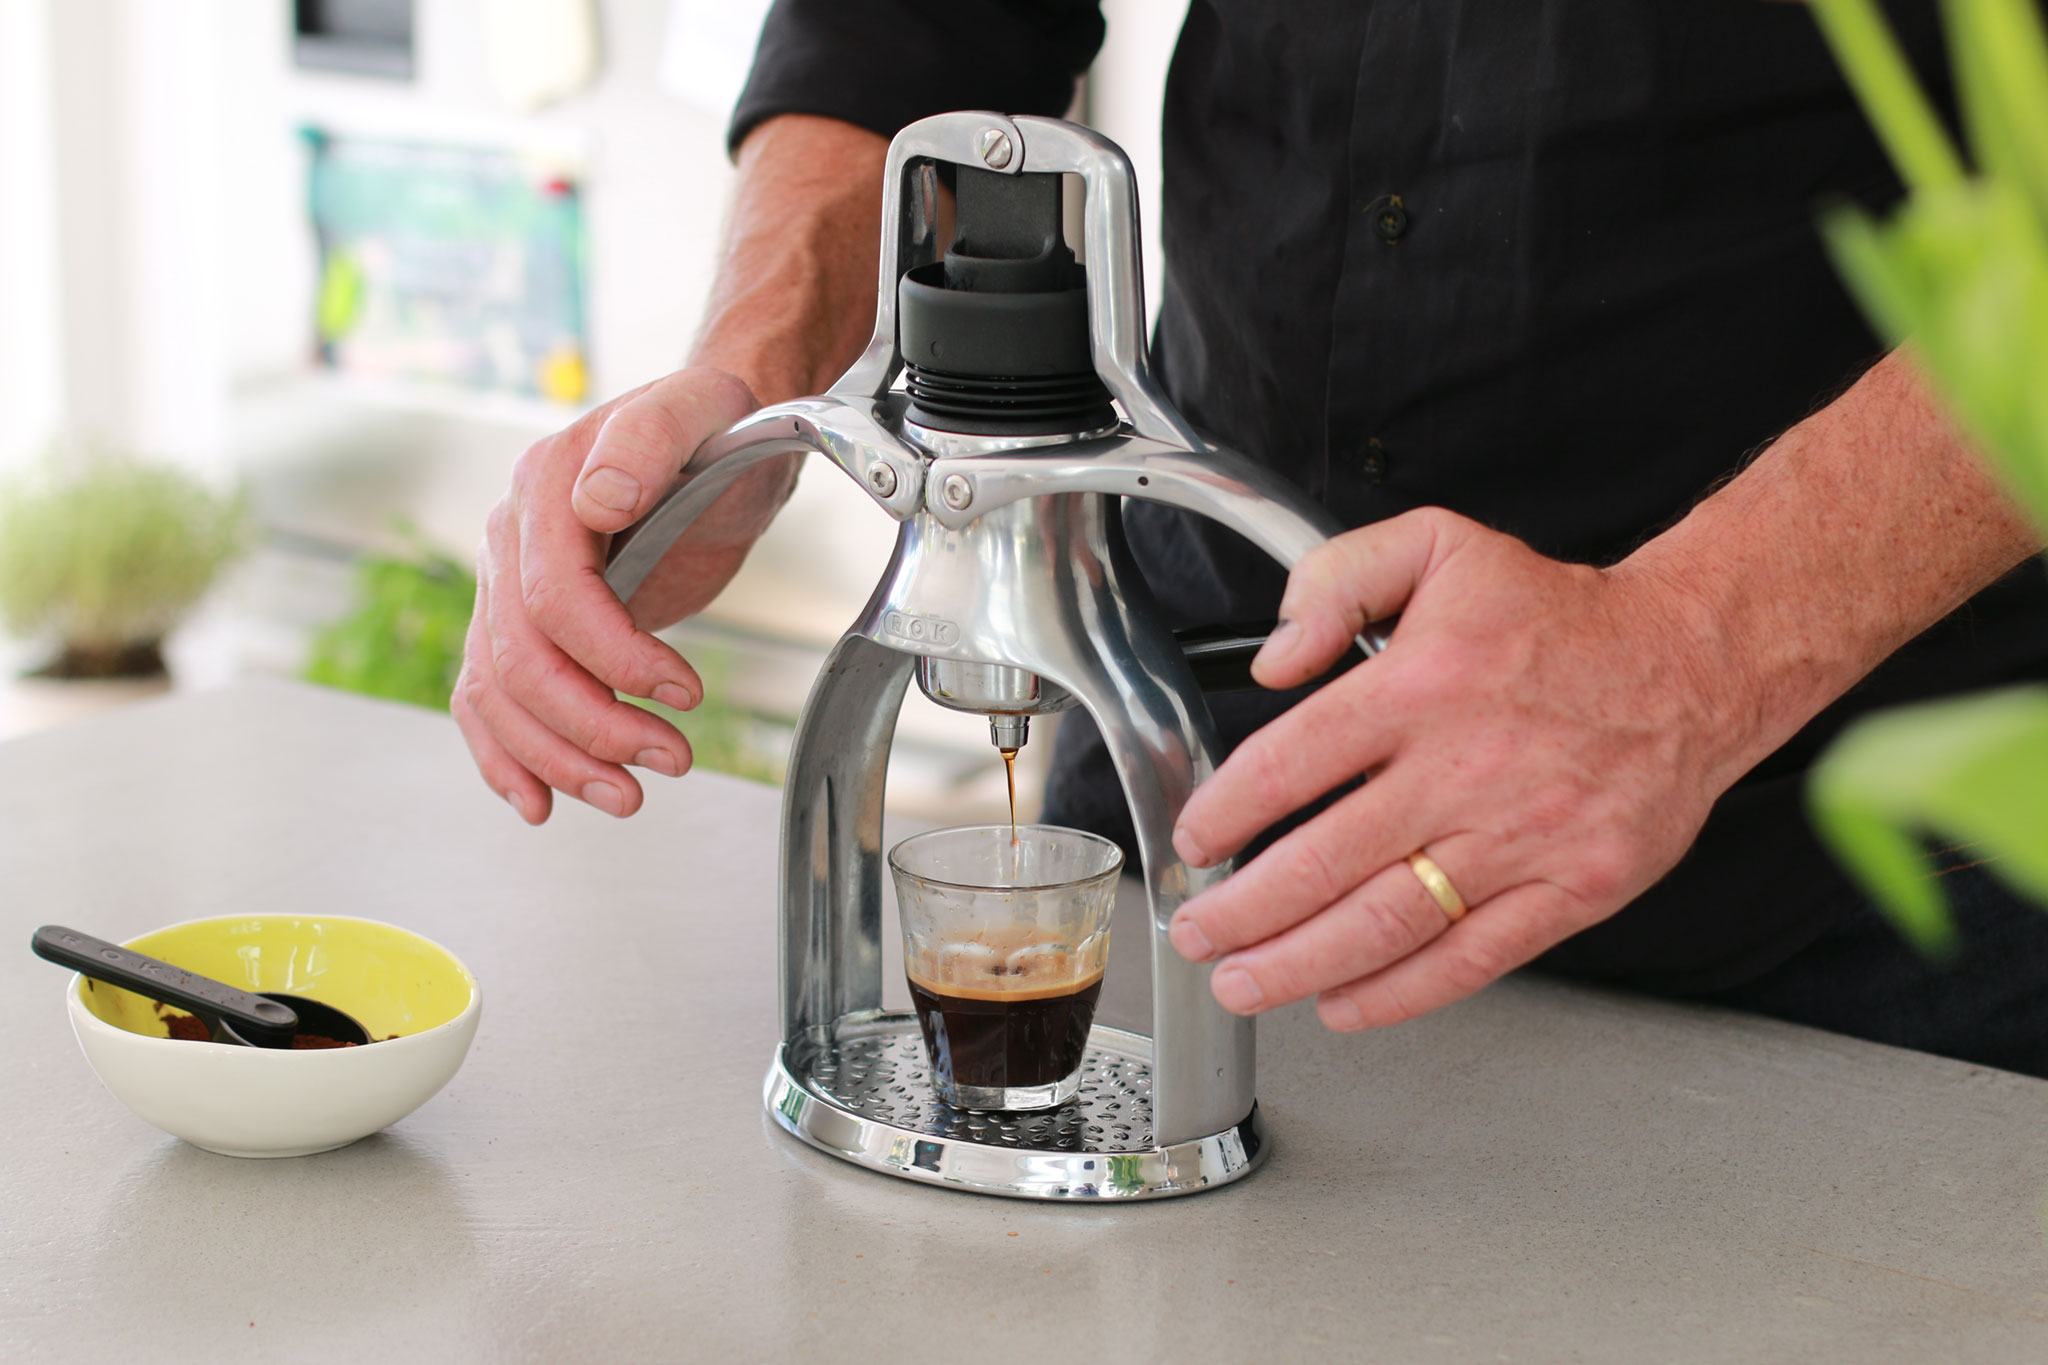 b"How To Make Cold Brew Coffee Recipe | Leites Culinaria"